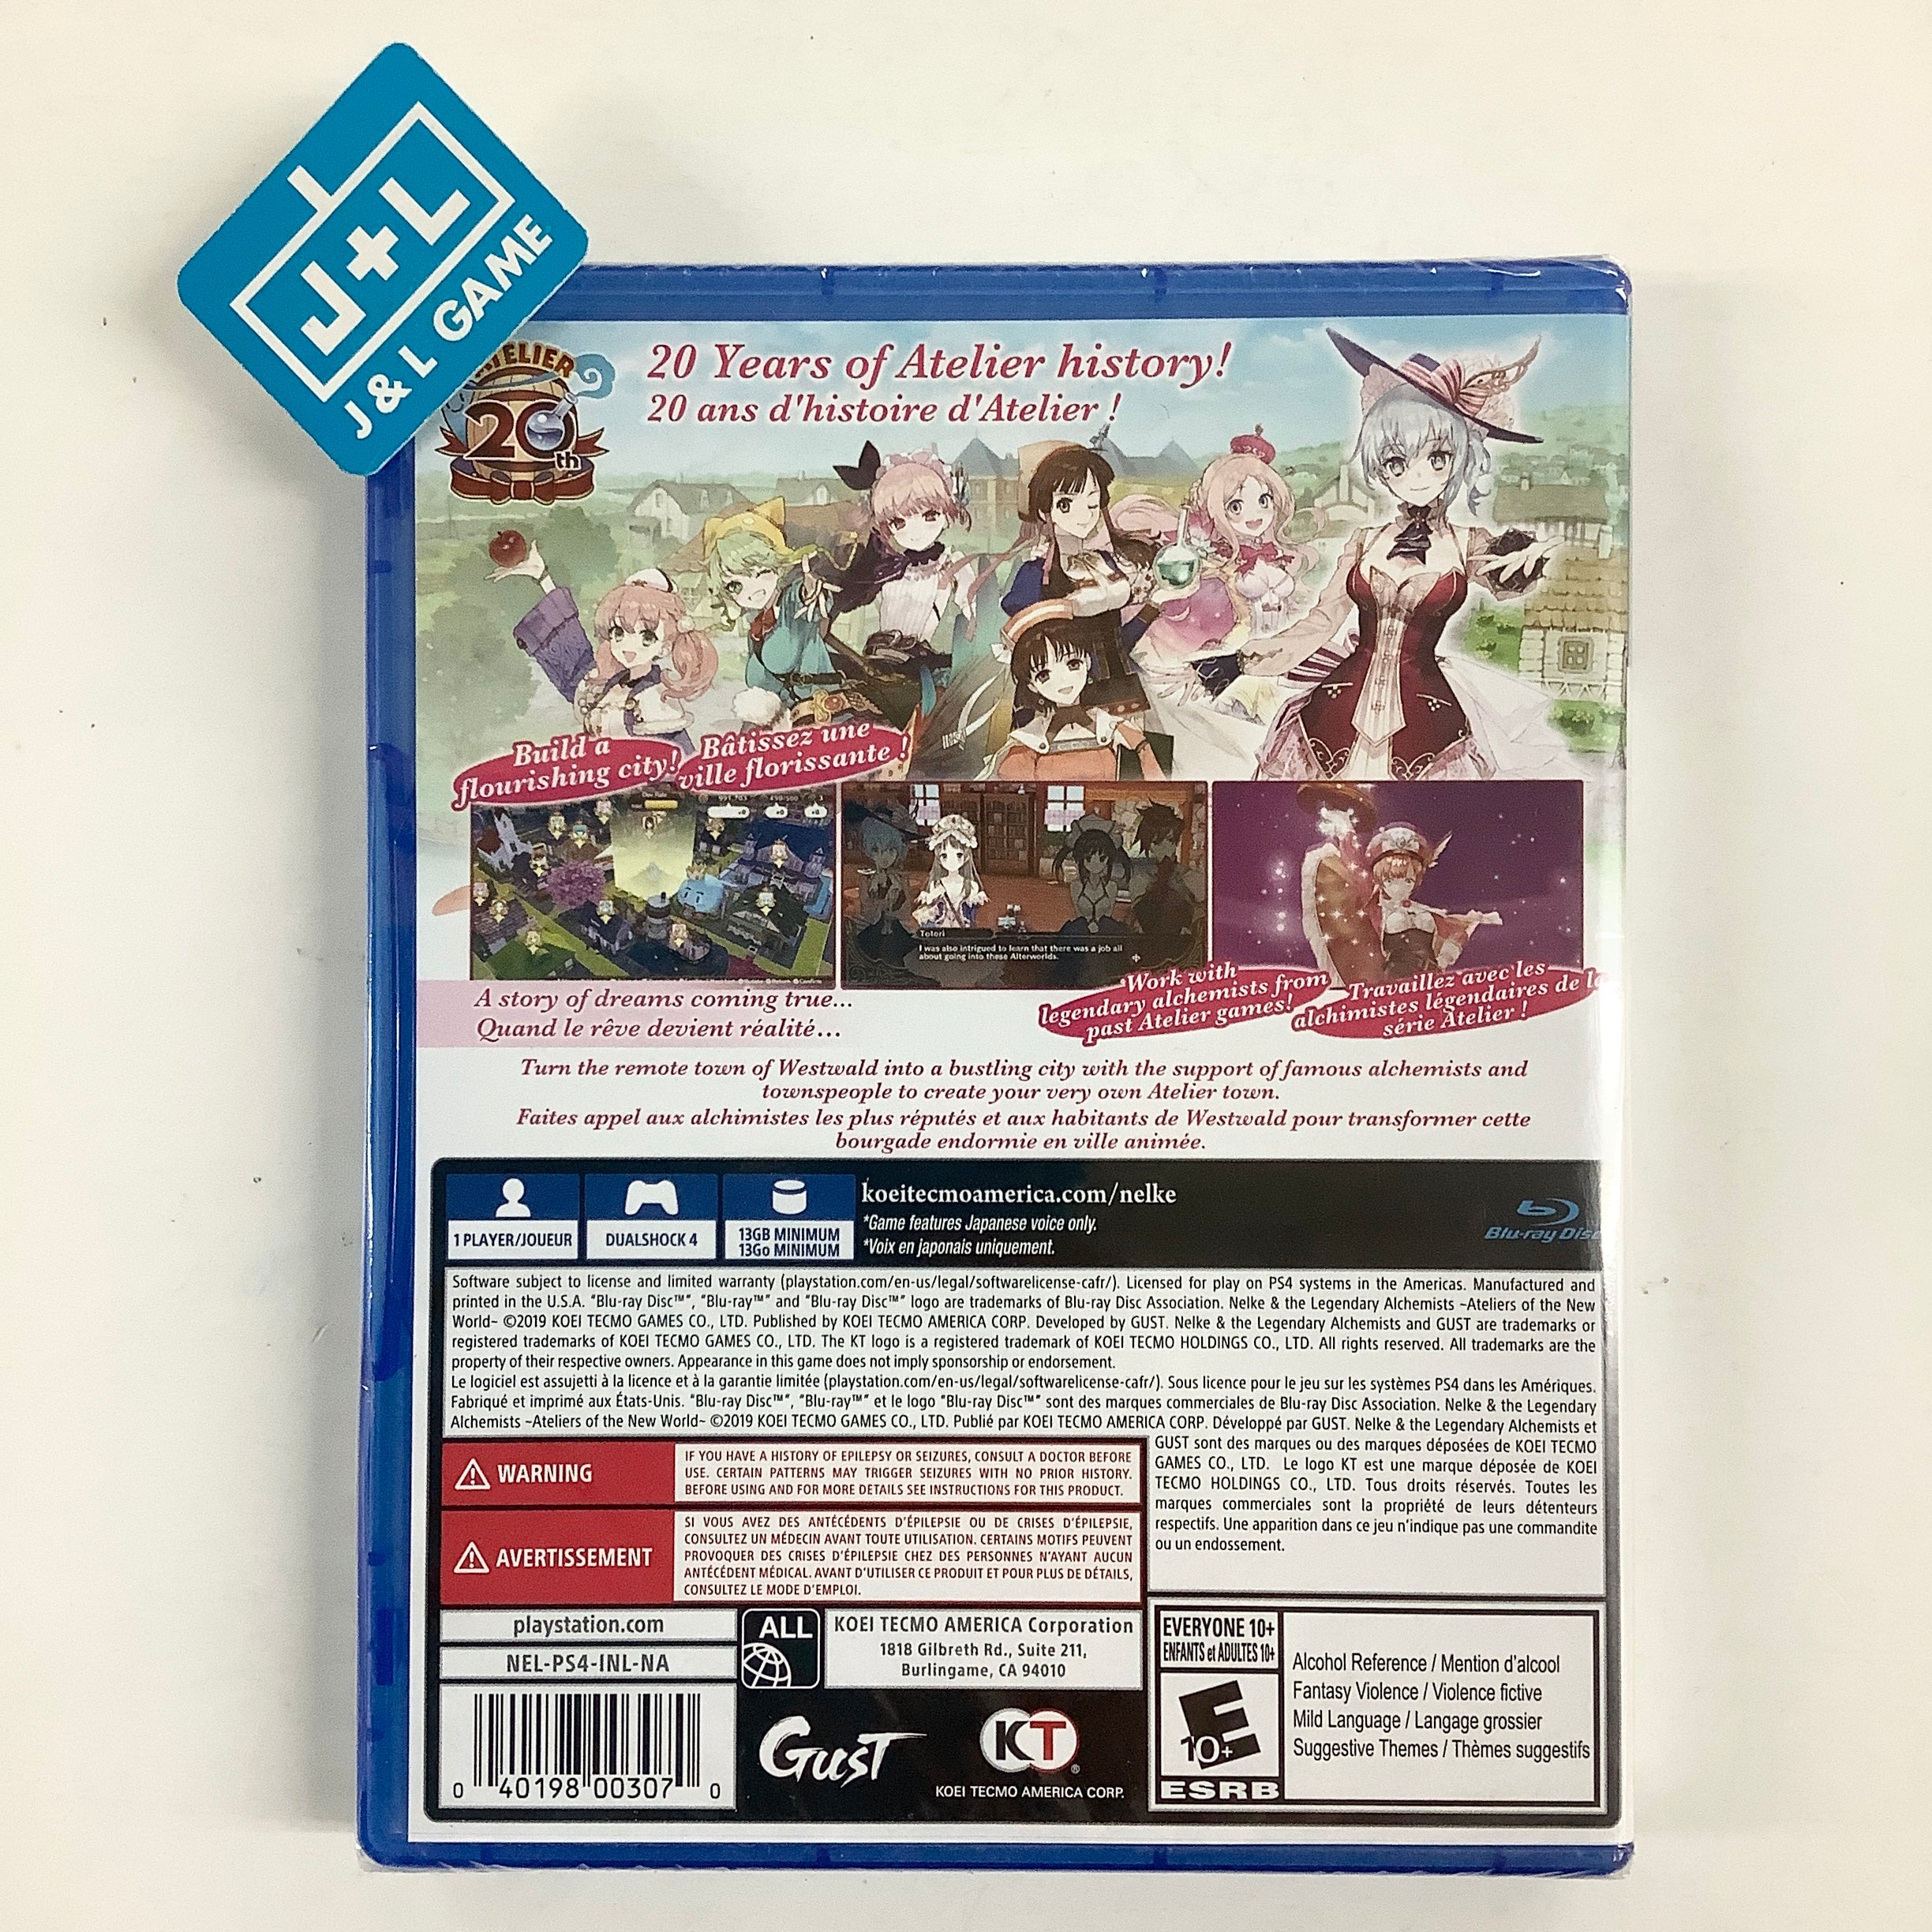 Nelke & the Legendary Alchemists: Ateliers of the New World - (PS4) PlayStation 4 Video Games Koei Tecmo Games   